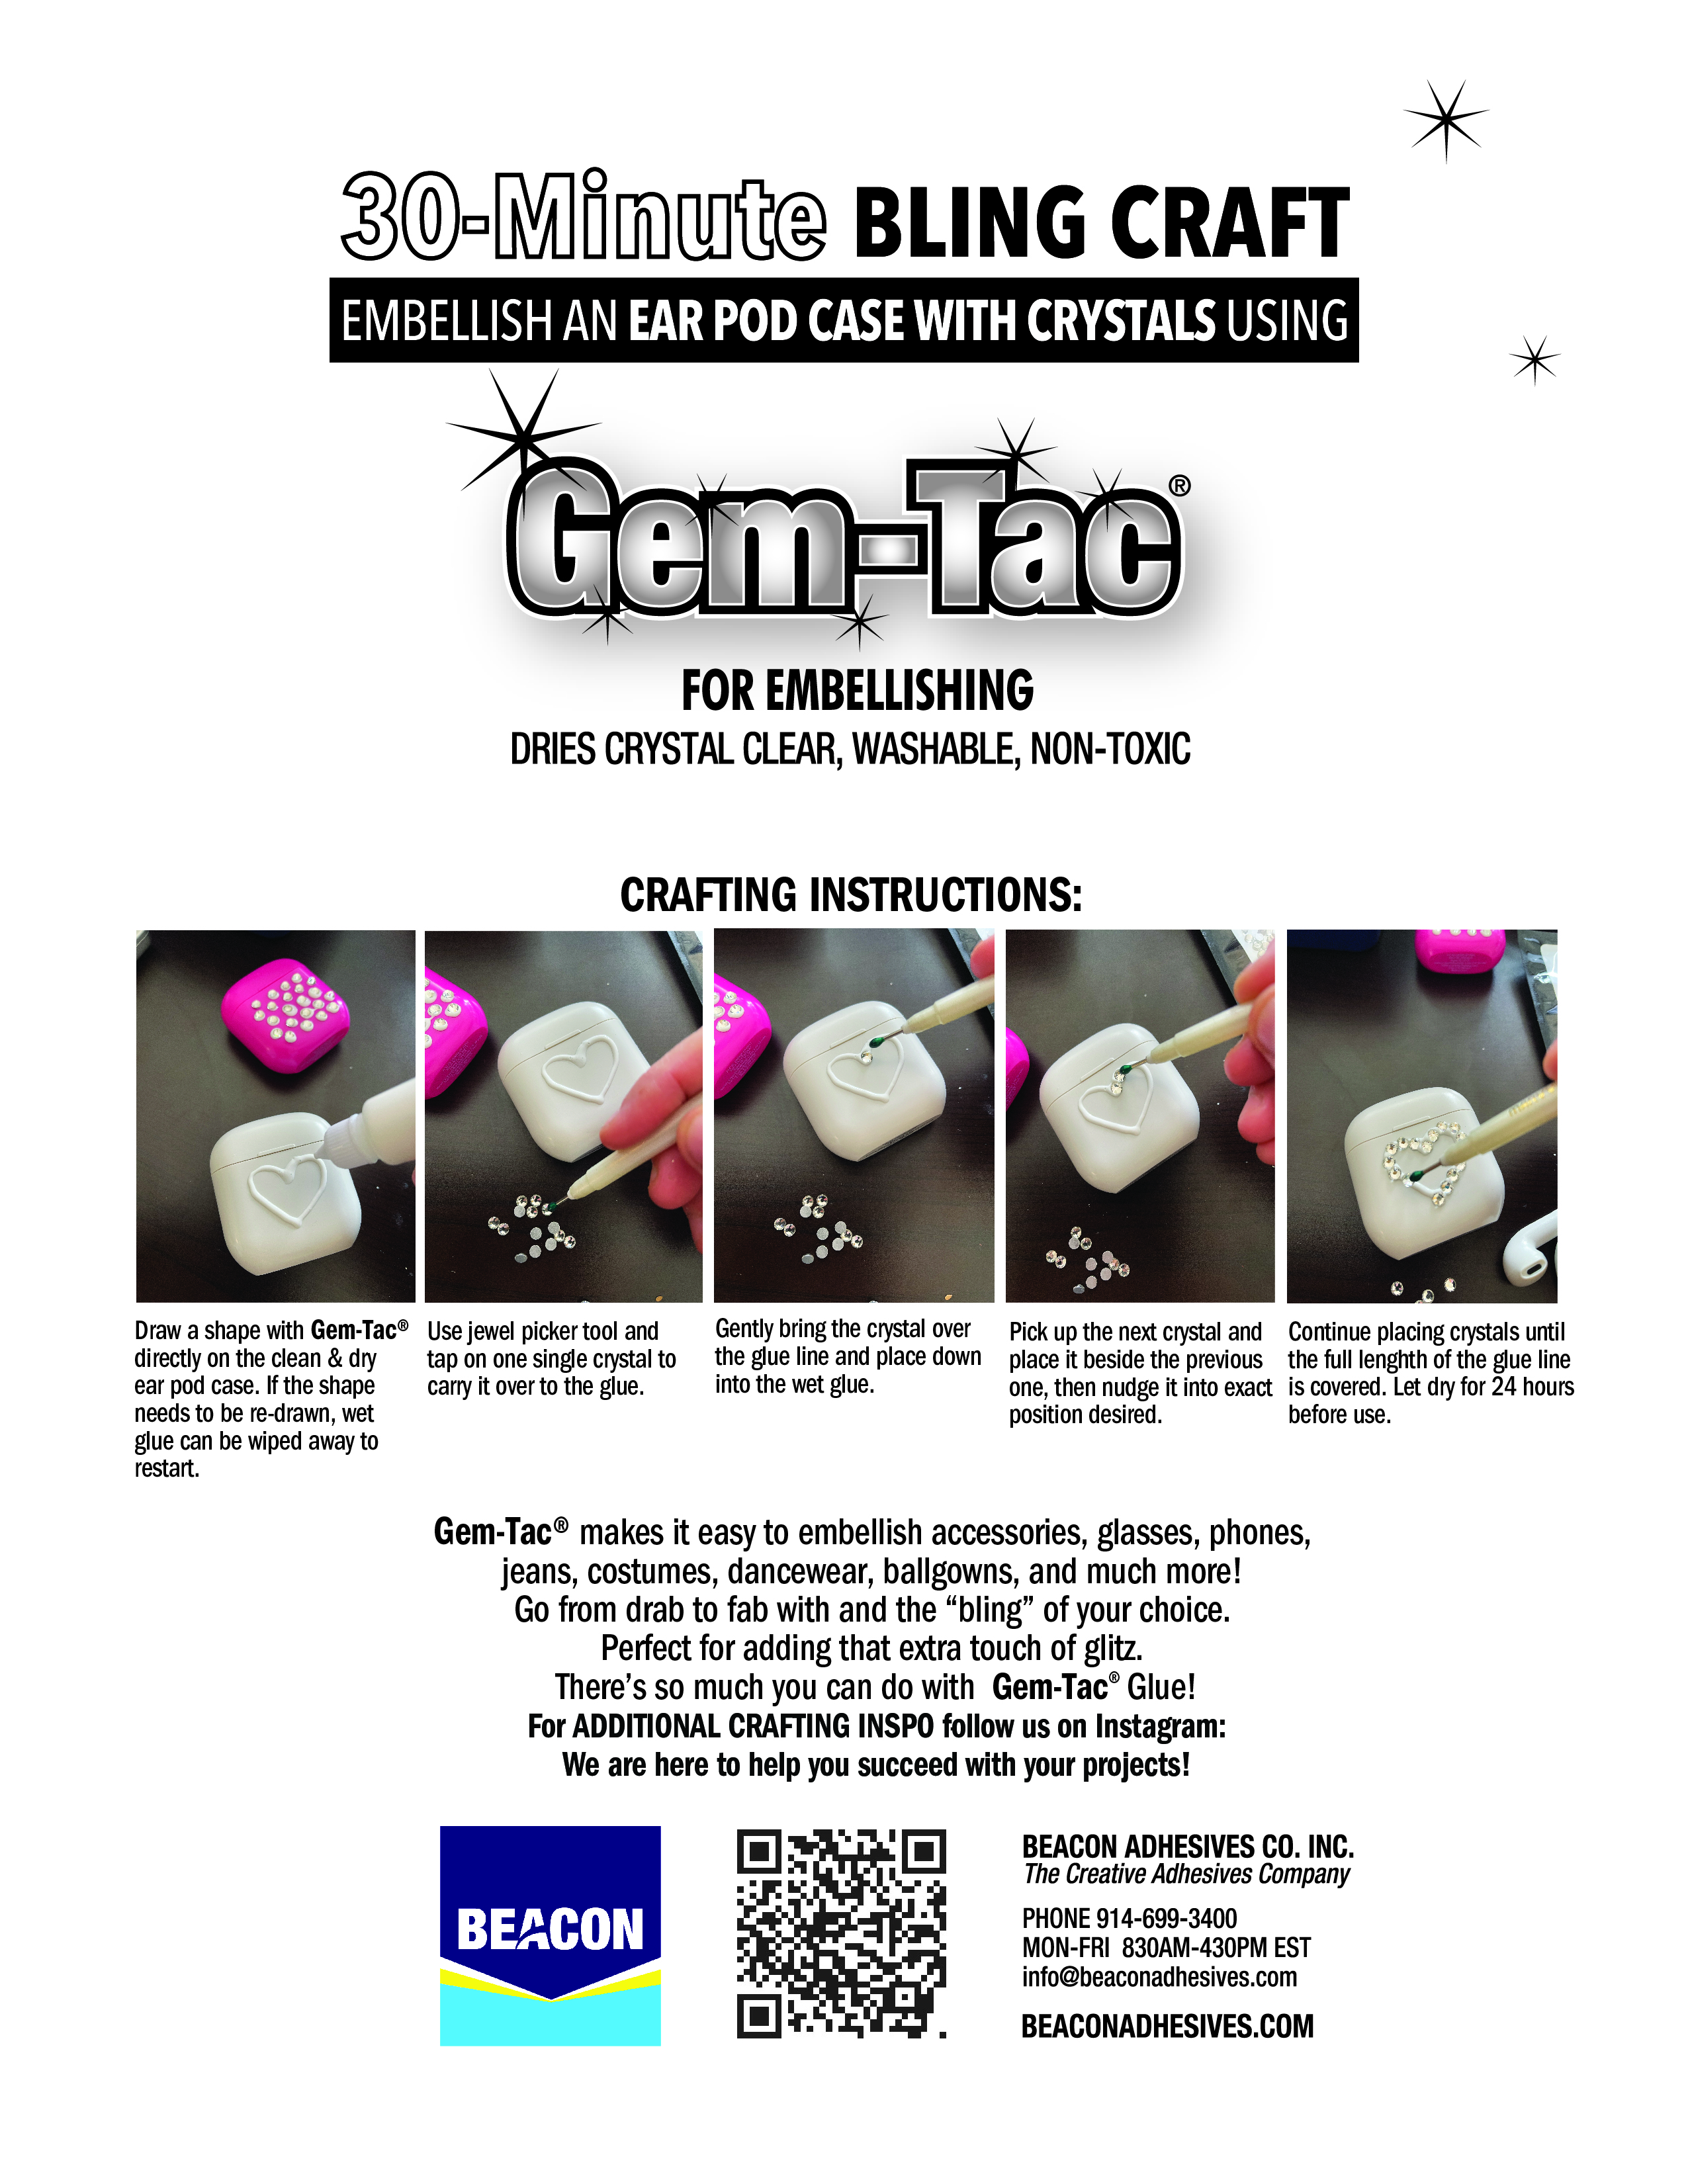 Beacon Gem-Tac Permanent Glue - Cleaner's Supply